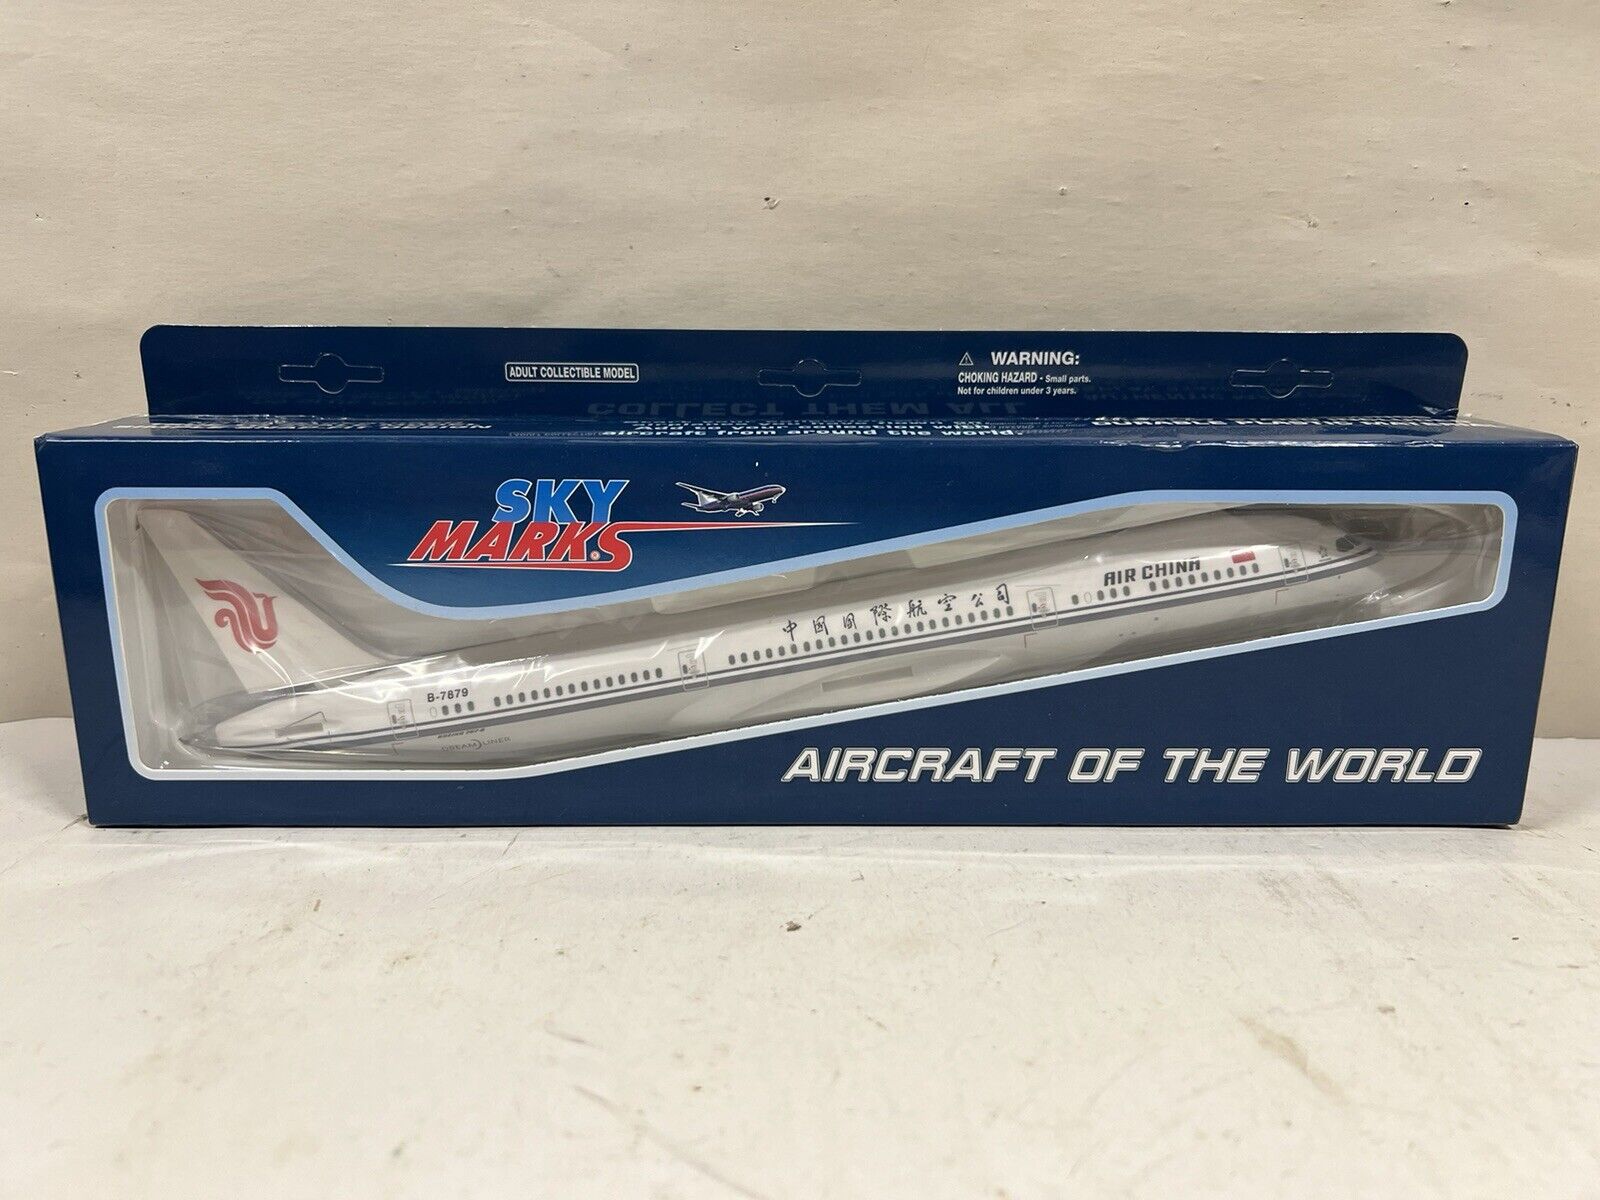 1/200 Air China Airlines Boeing 787 Airplane Sky Marks Aircraft of the World